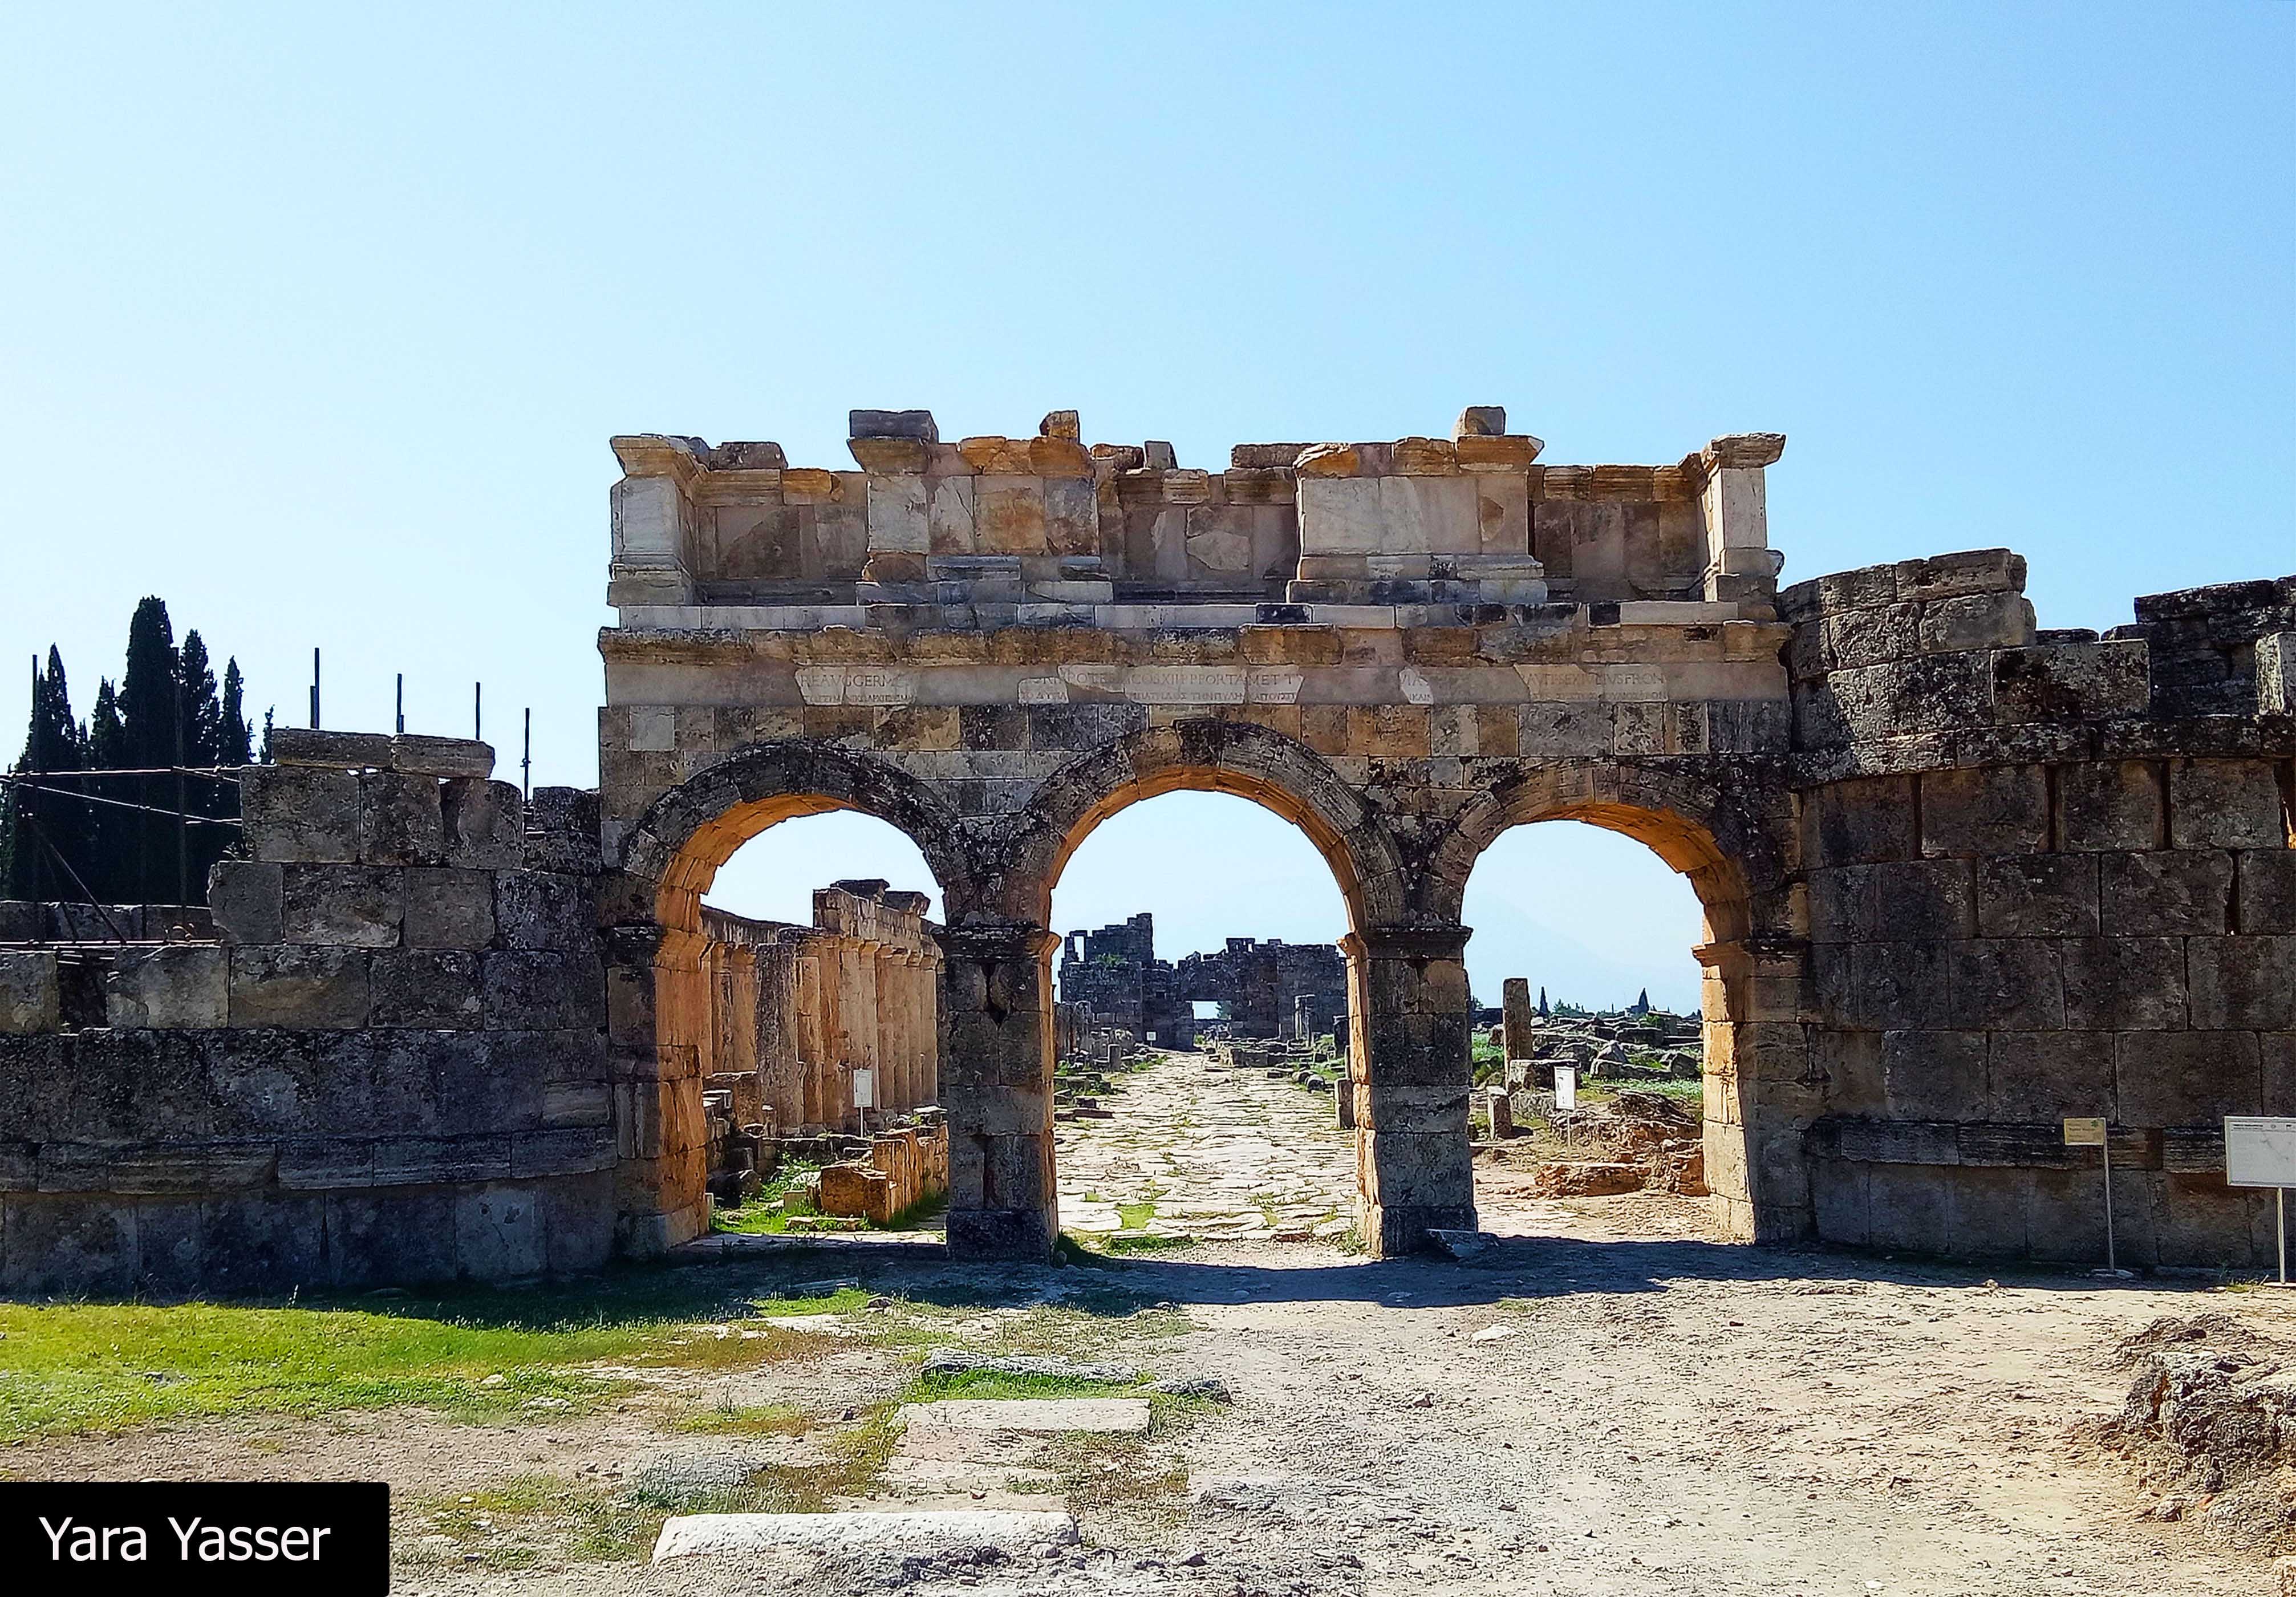 It's Frontinus Gate. This is the entrance to the Roman city with three openings and 14 m wide. It leads to North Byzantine Gate.